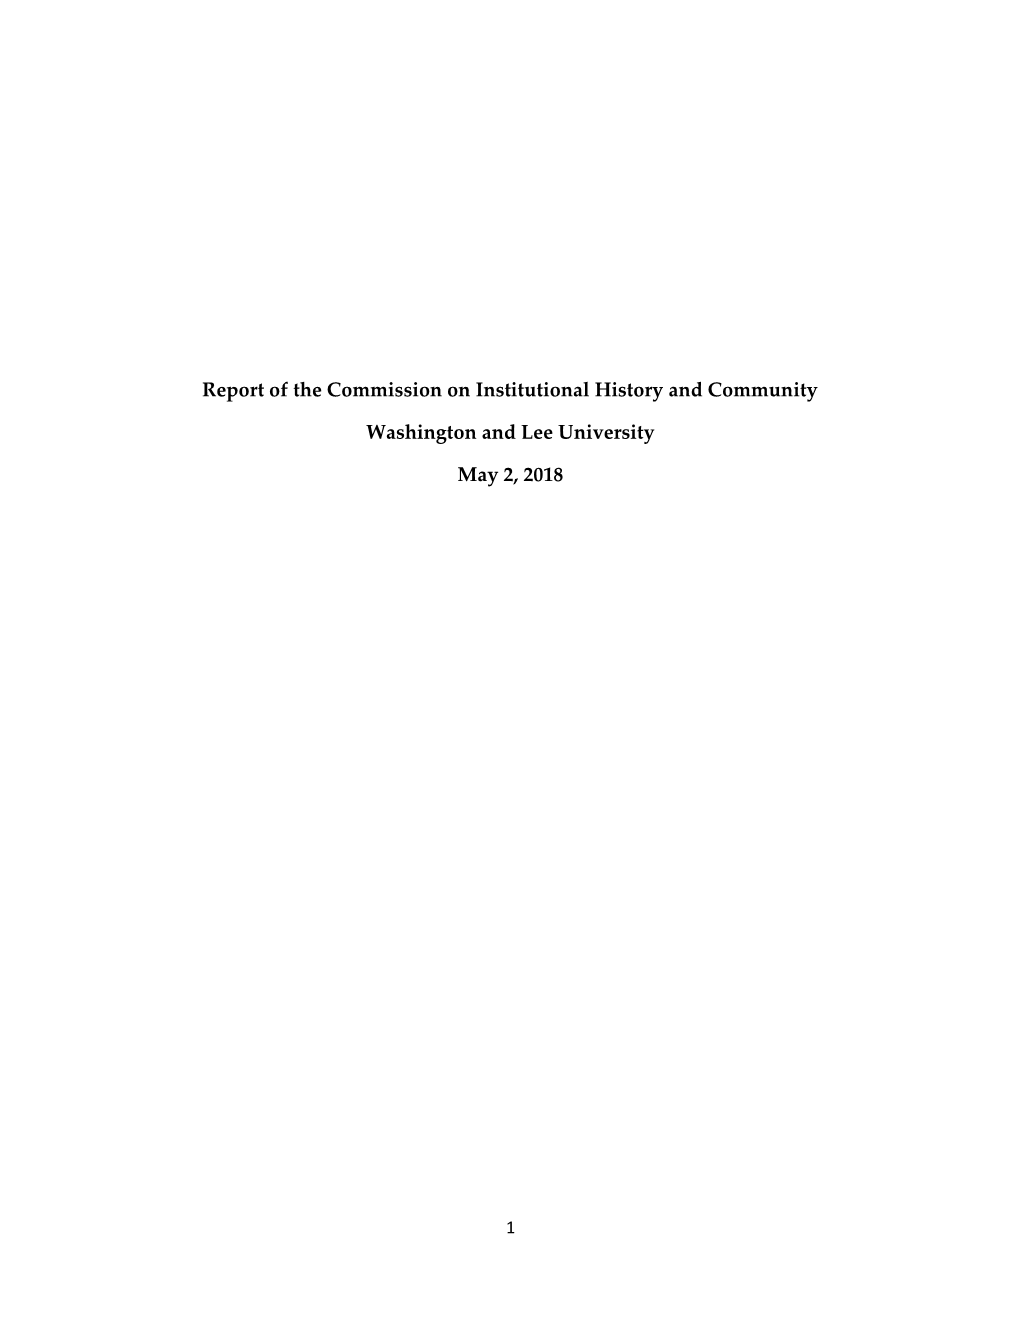 Report of the Commission on Institutional History and Community